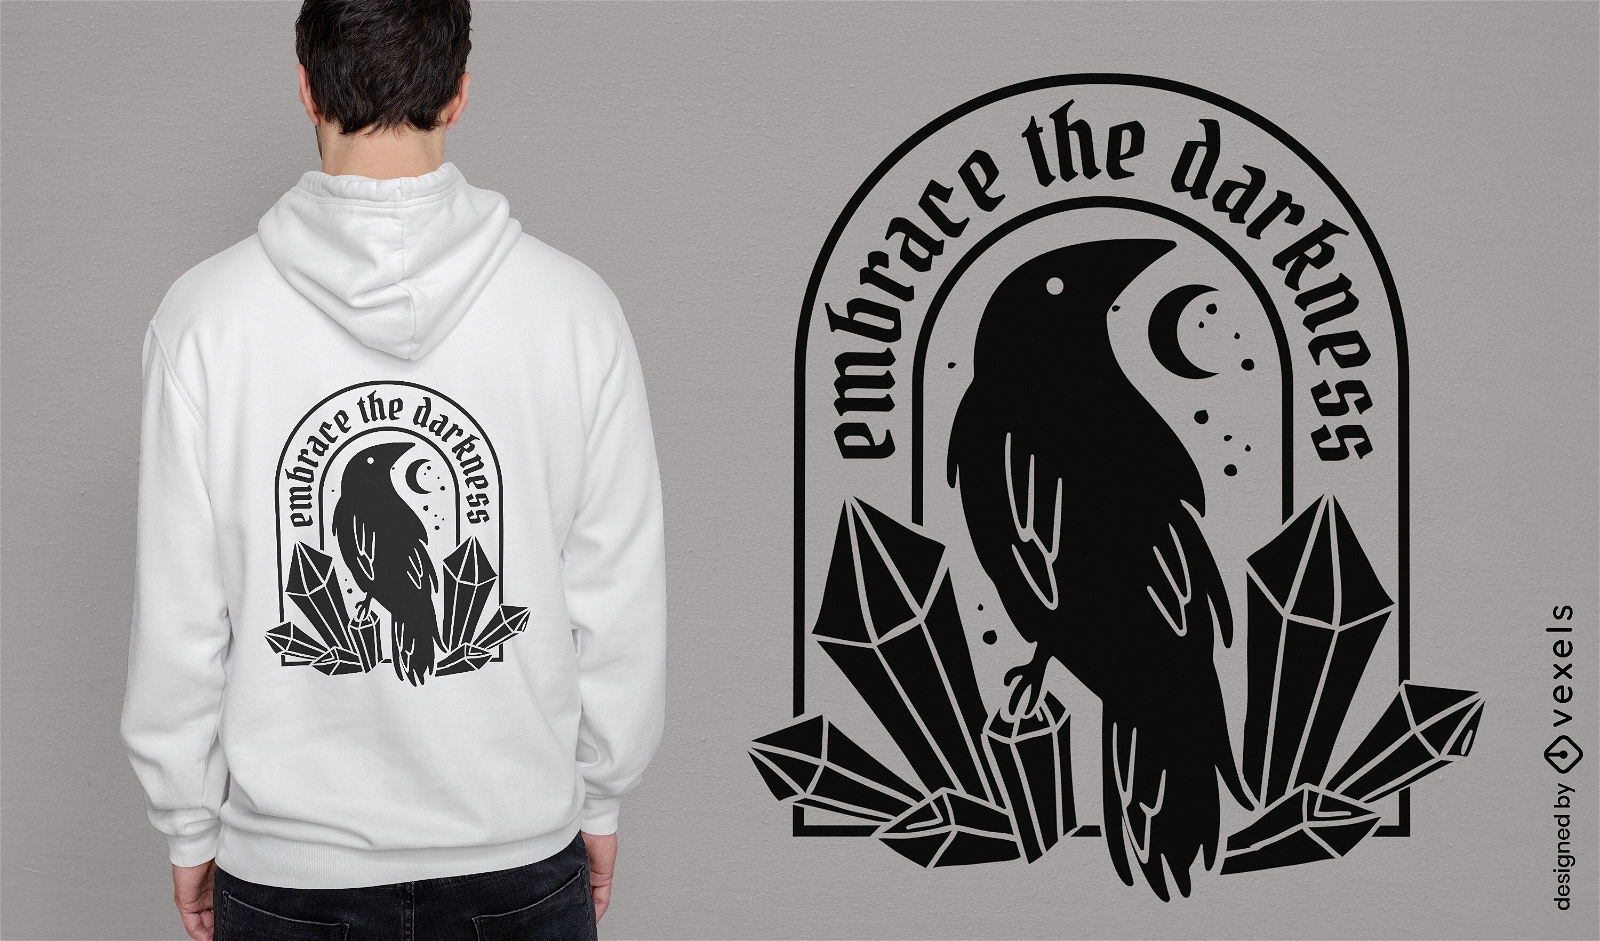 Embrace the darkness crow and crystals t-shirt design